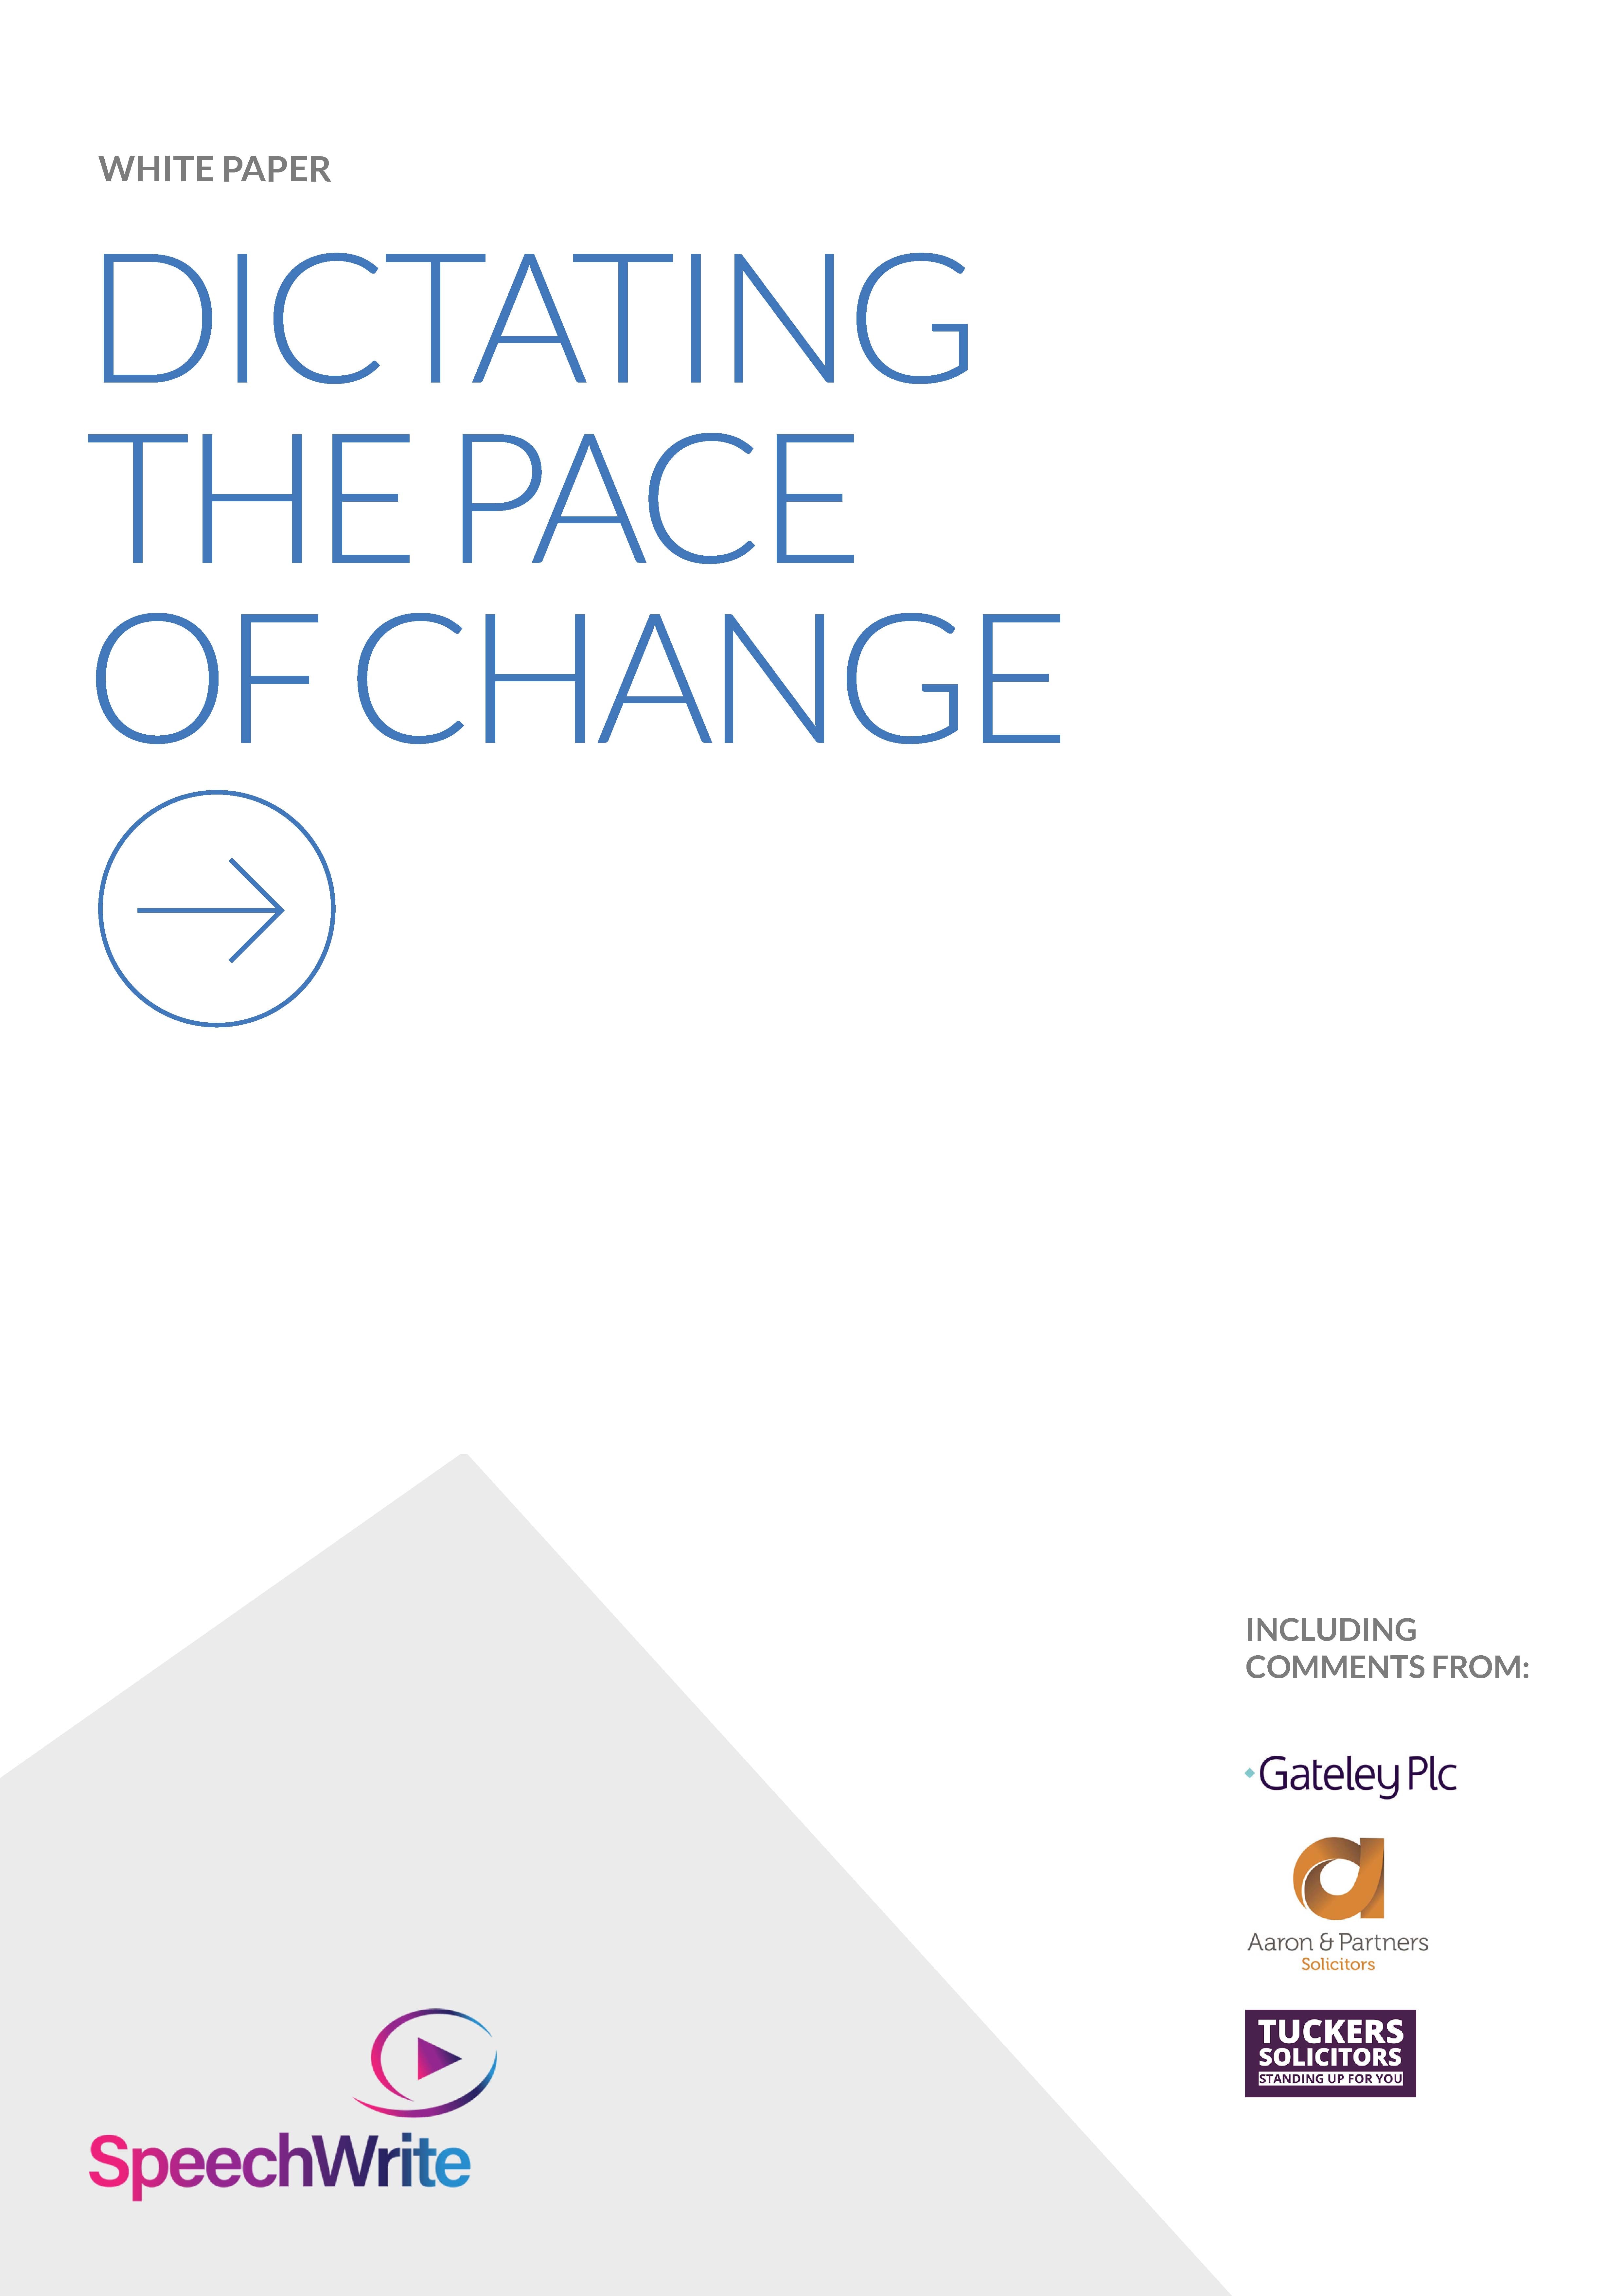 Dictating the Pace of Change